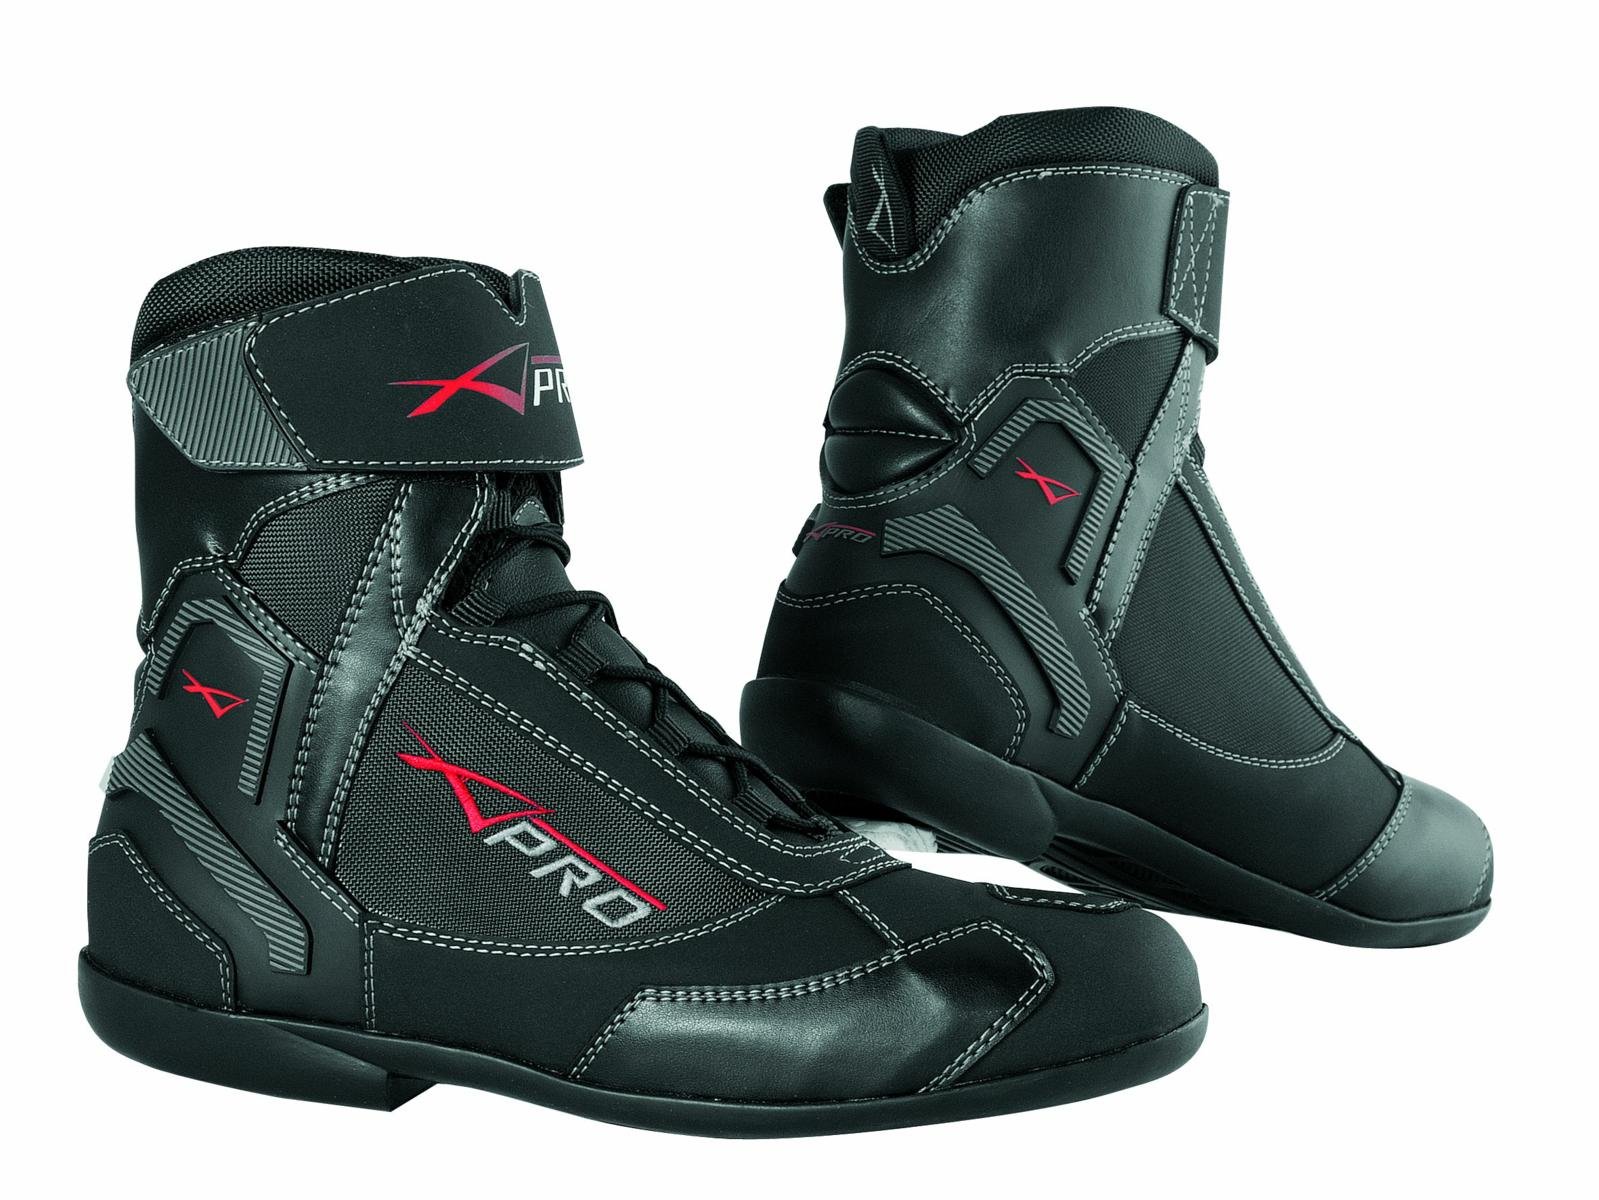 A-Pro Winter Motorbike Motorcycle Breathable Waterproof Leather Boots Black 39 von A-Pro